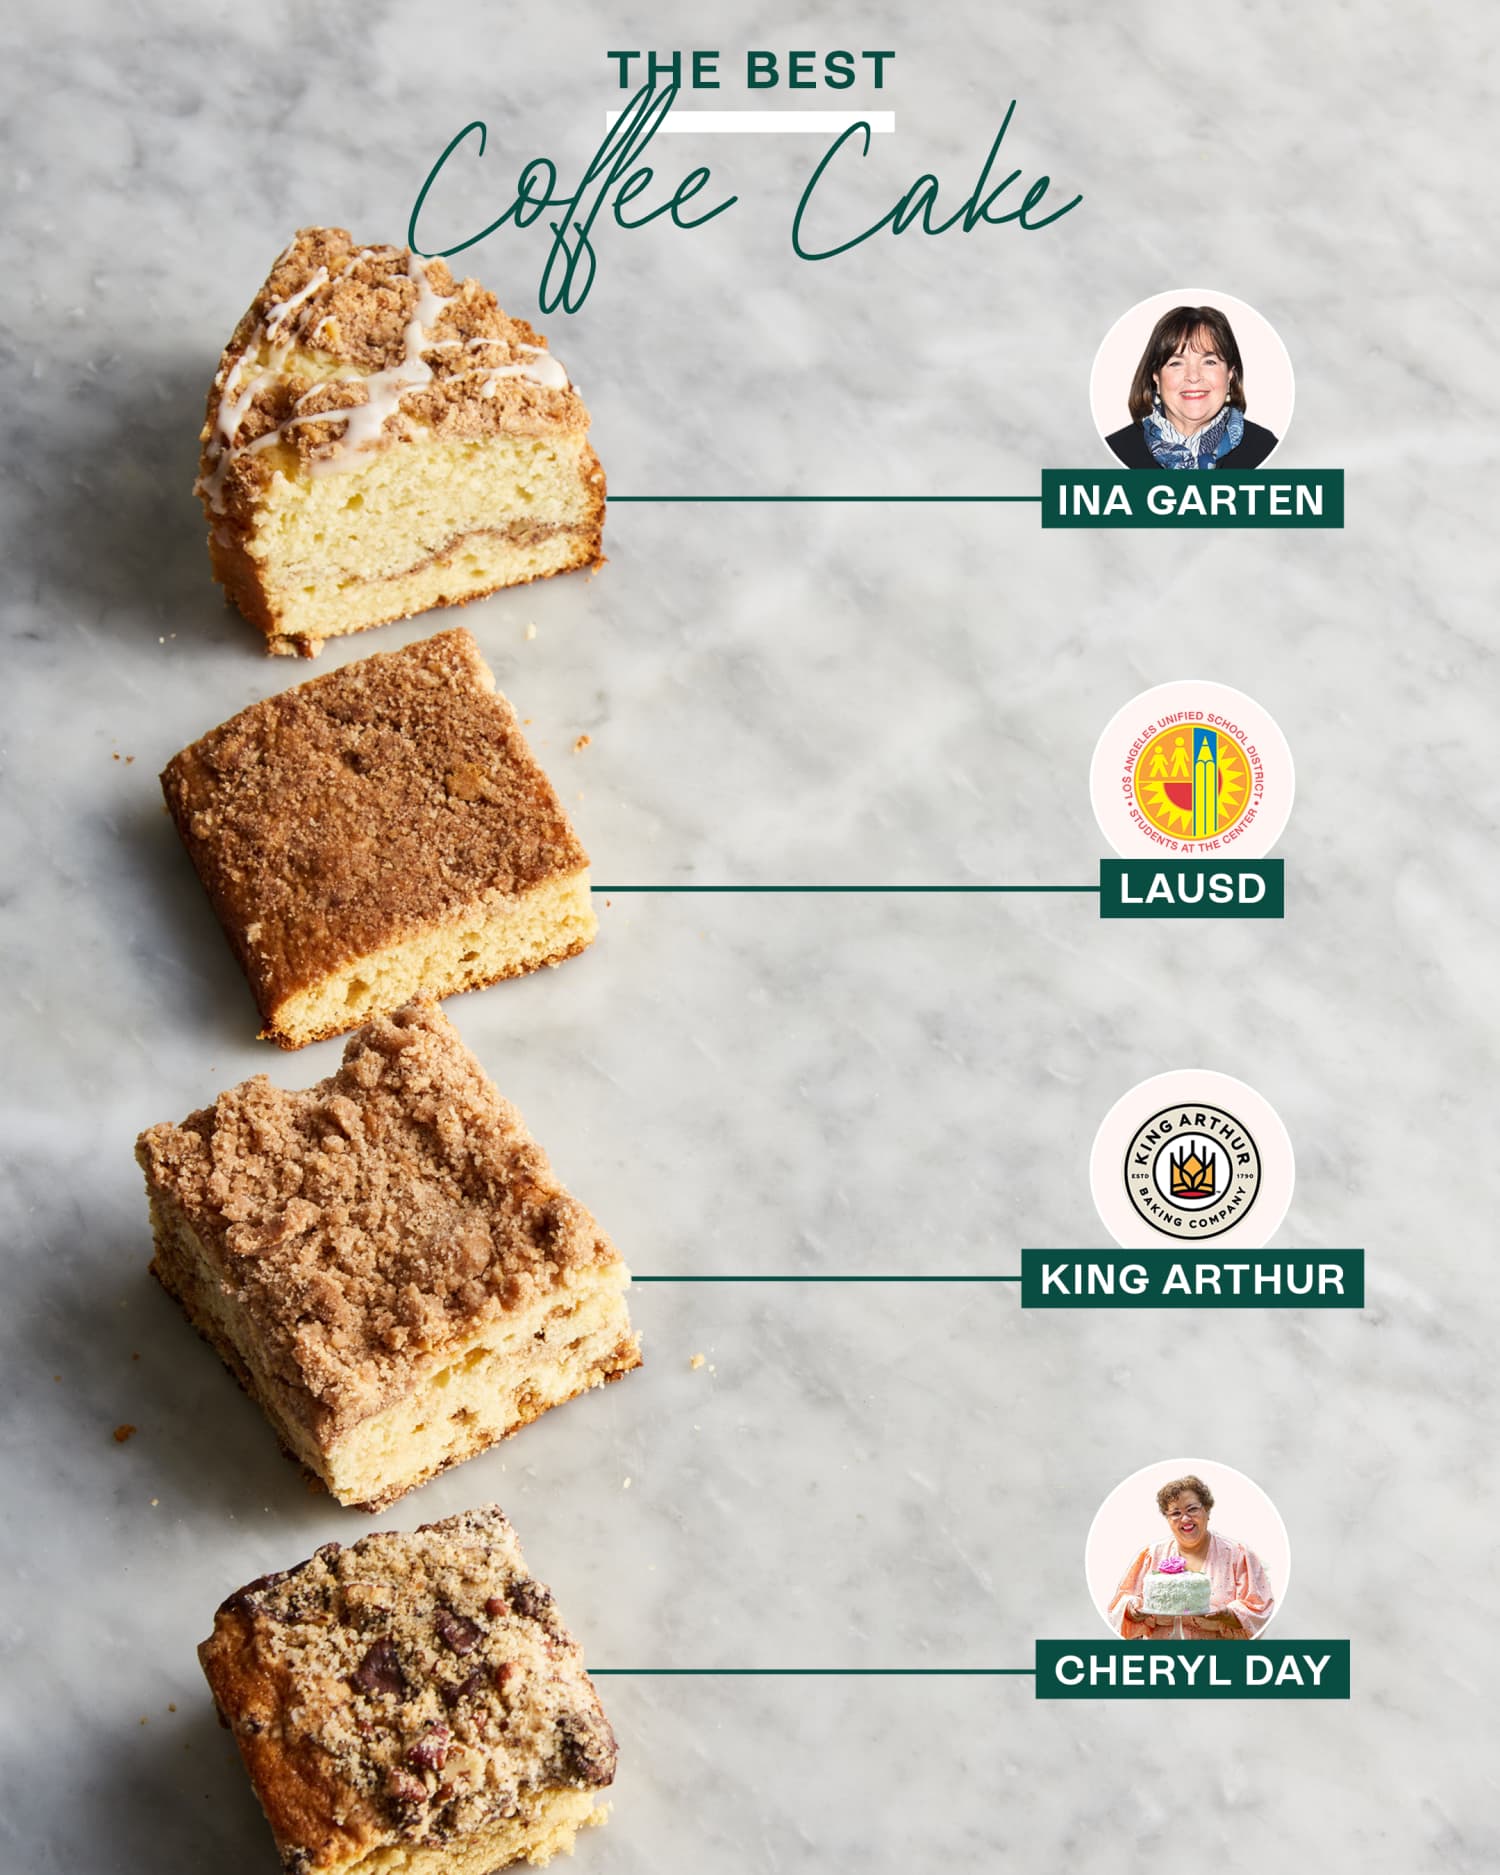 I Tried 4 Popular Coffee Cake Recipes and the Winner Is Buttery, Cinnamony Perfection